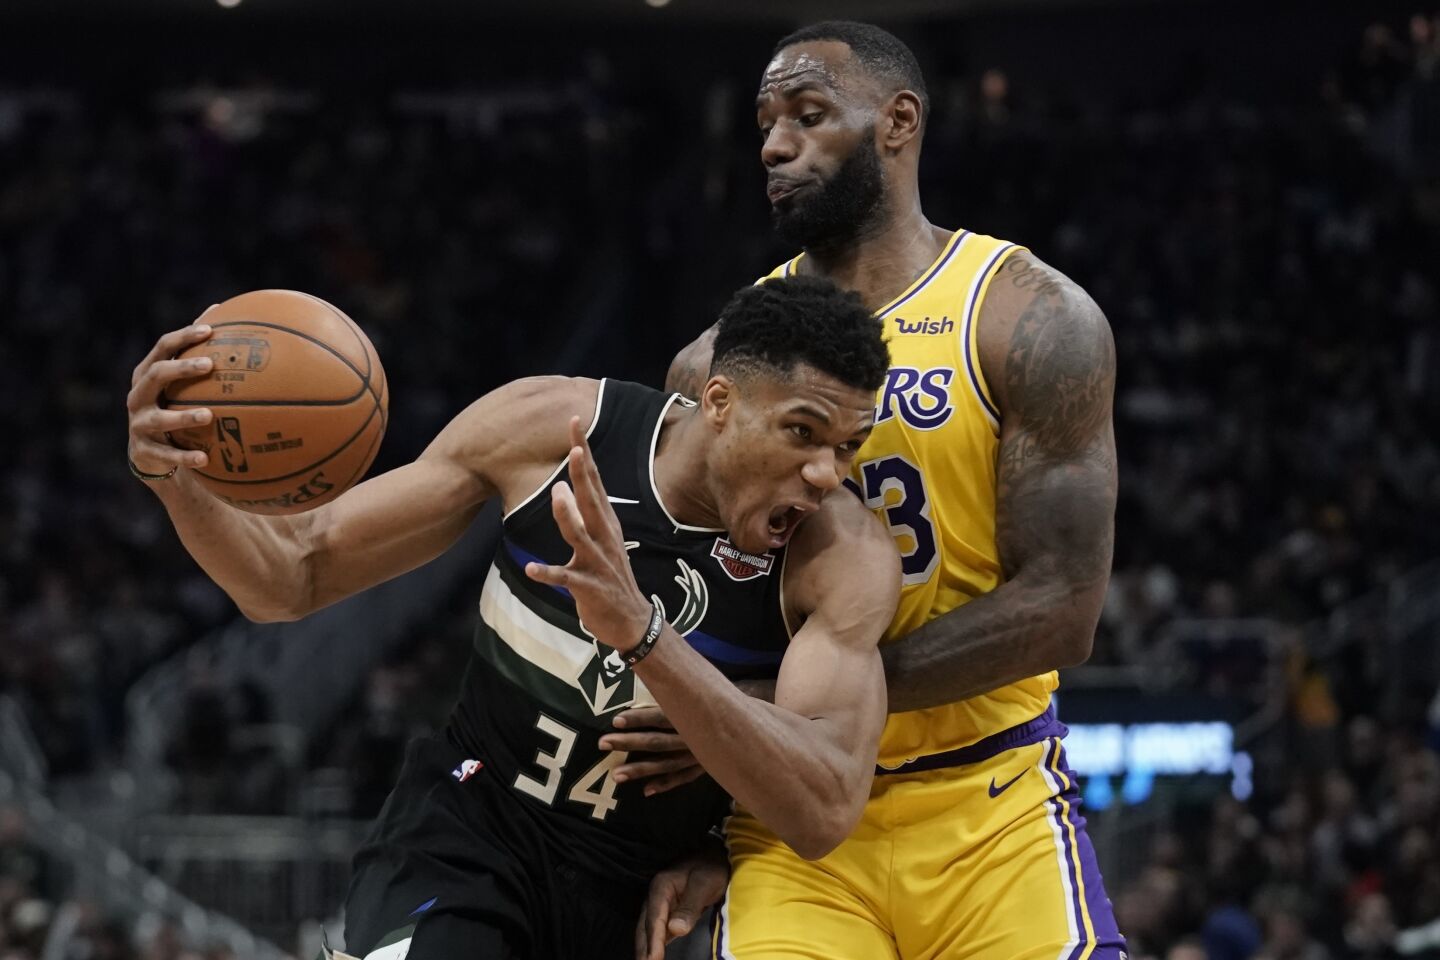 Bucks forward Giannis Antetokounmpo tries to drive past Lakers forward LeBron James during the second half of a game Dec. 19.